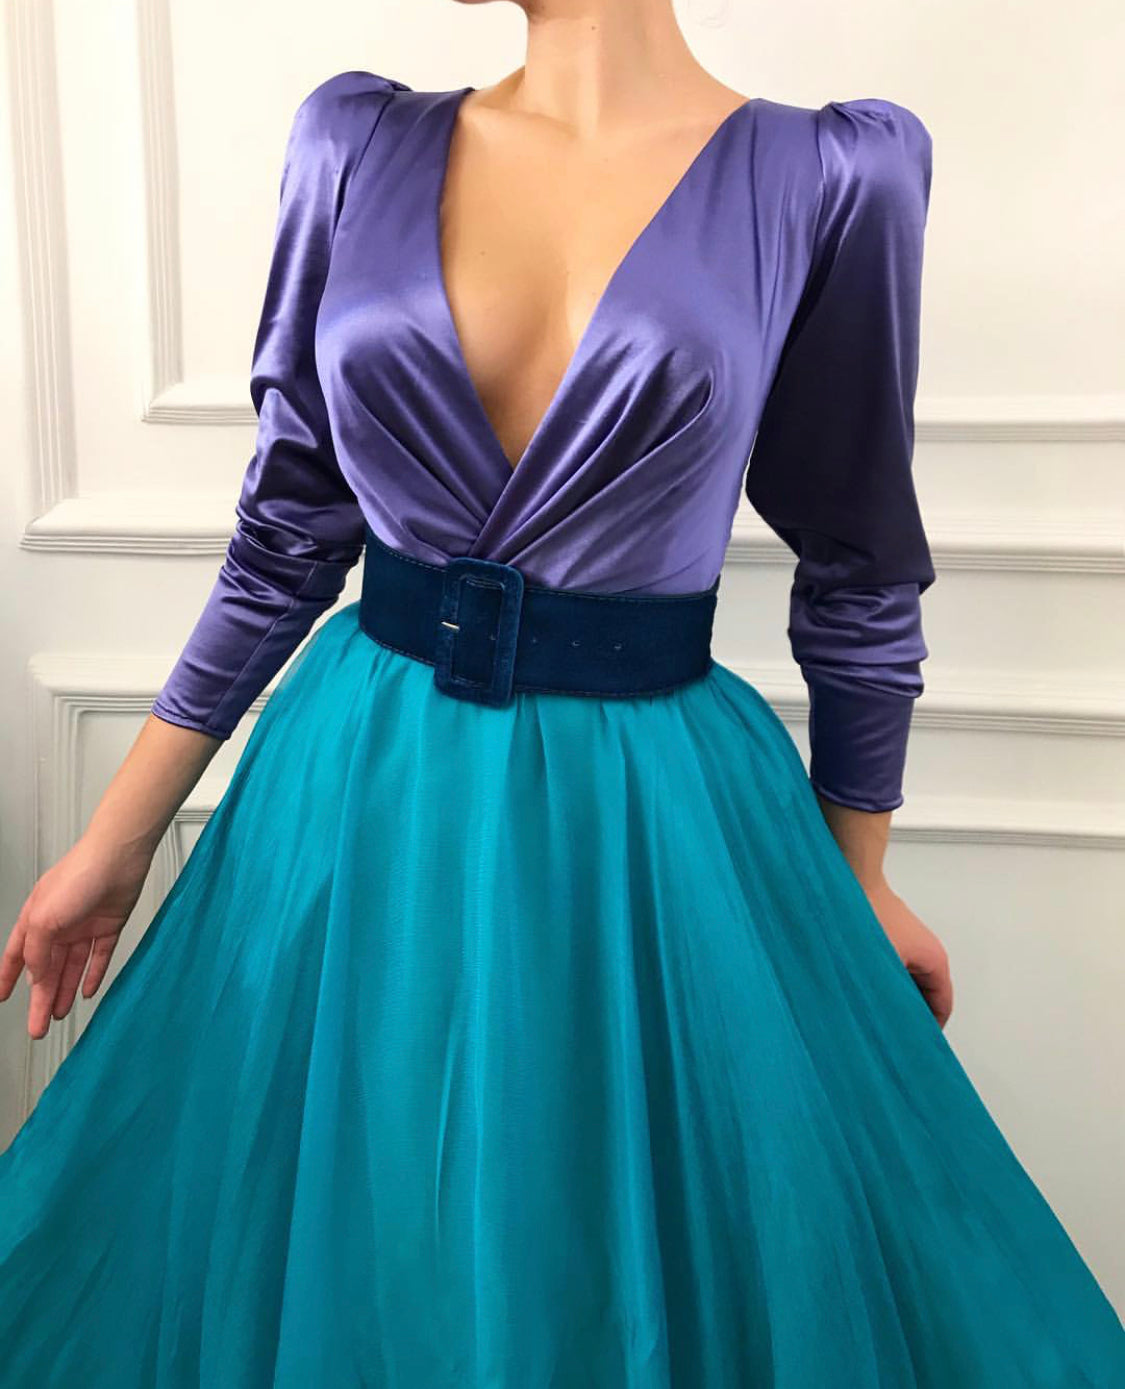 Blue and purple A-Line dress with v-neck, long sleeves and belt